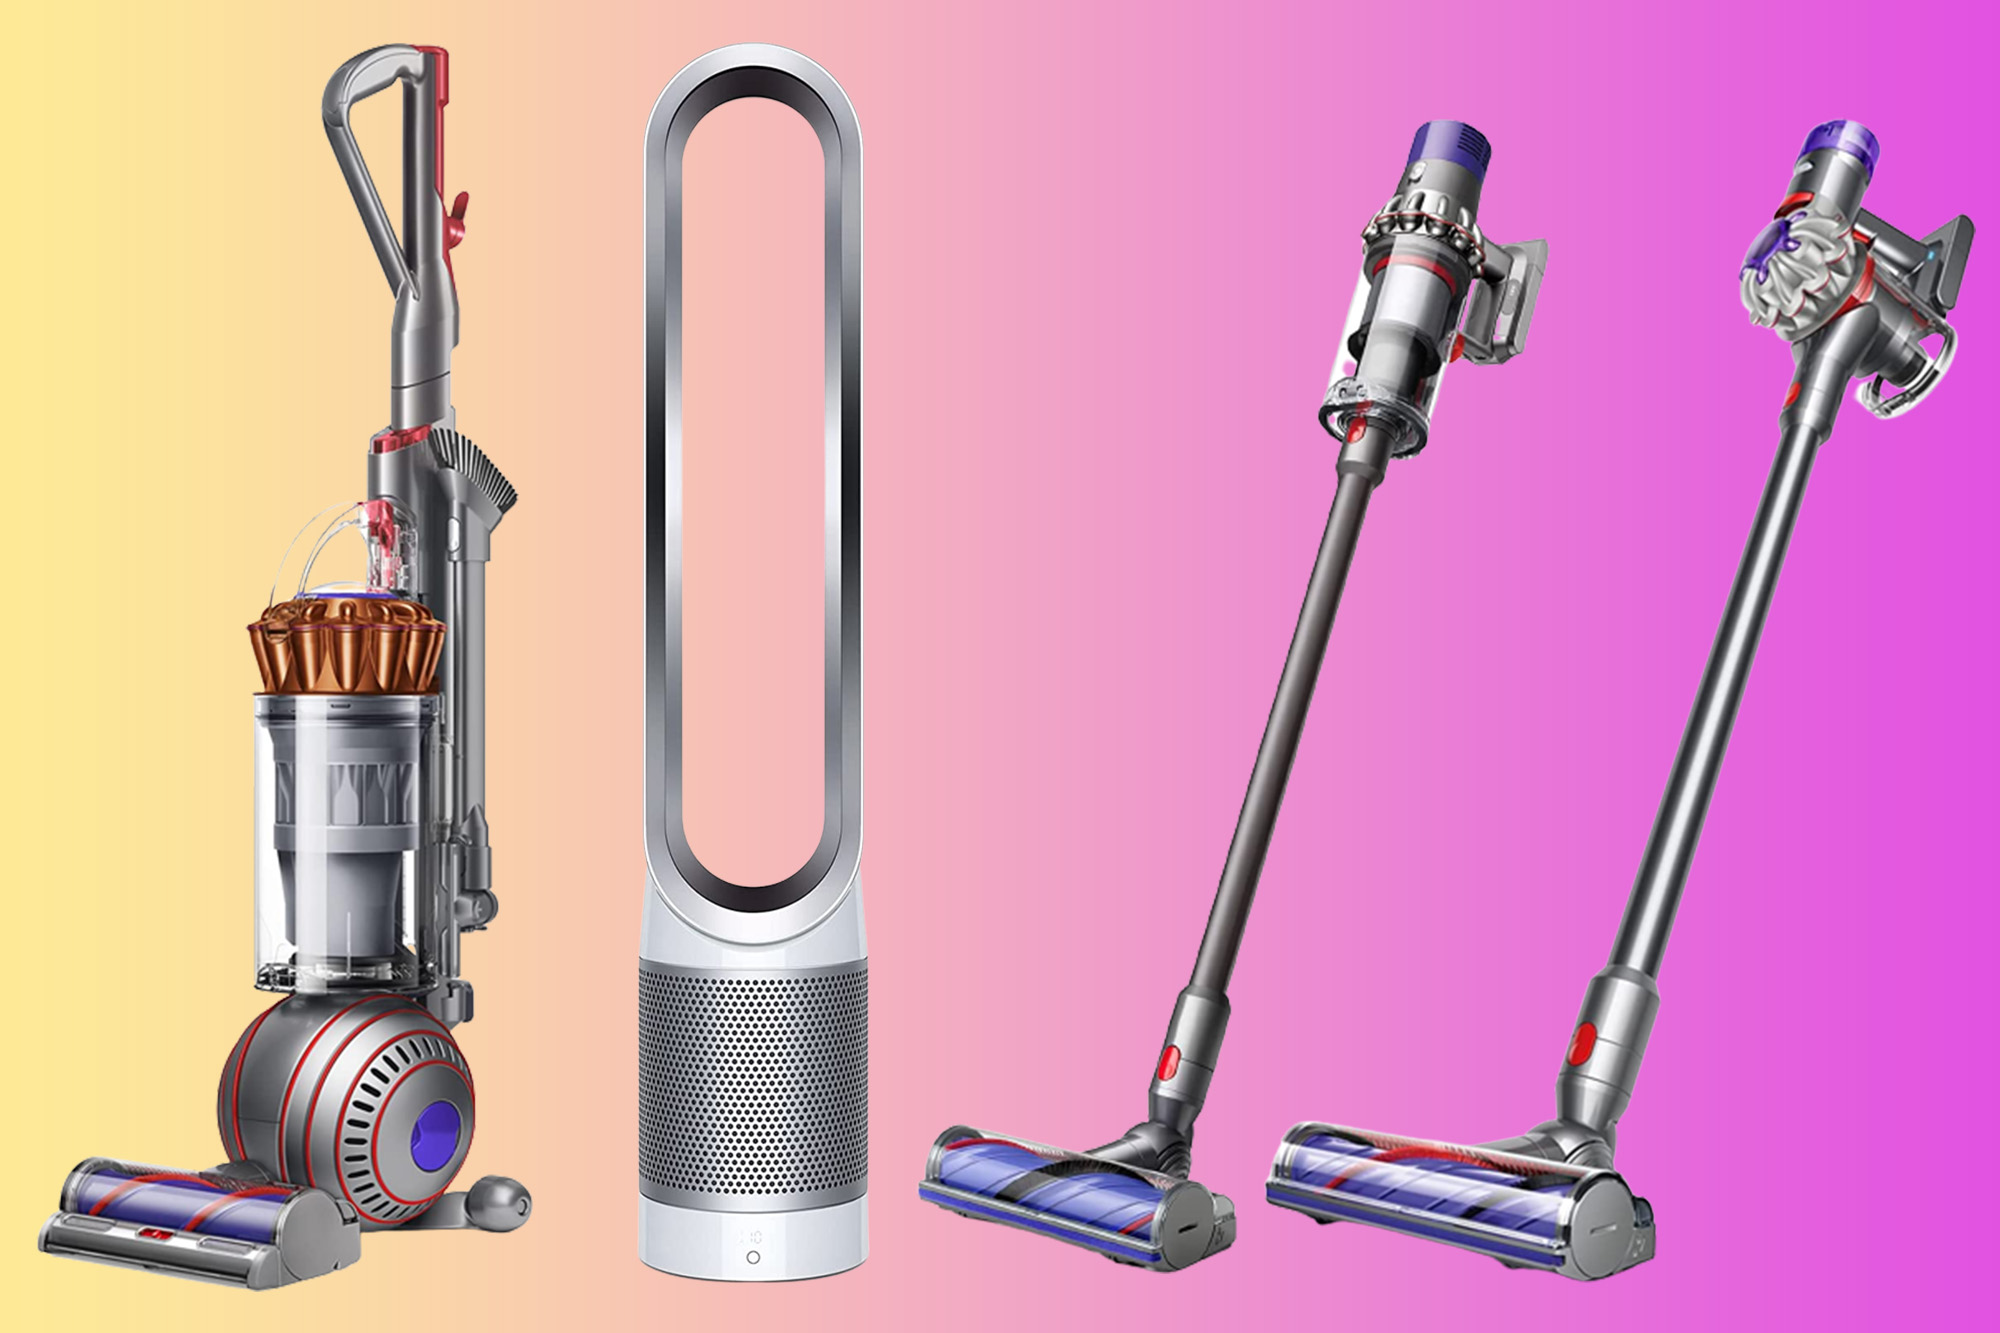 Clean up with $100 off a Dyson before Memorial Day